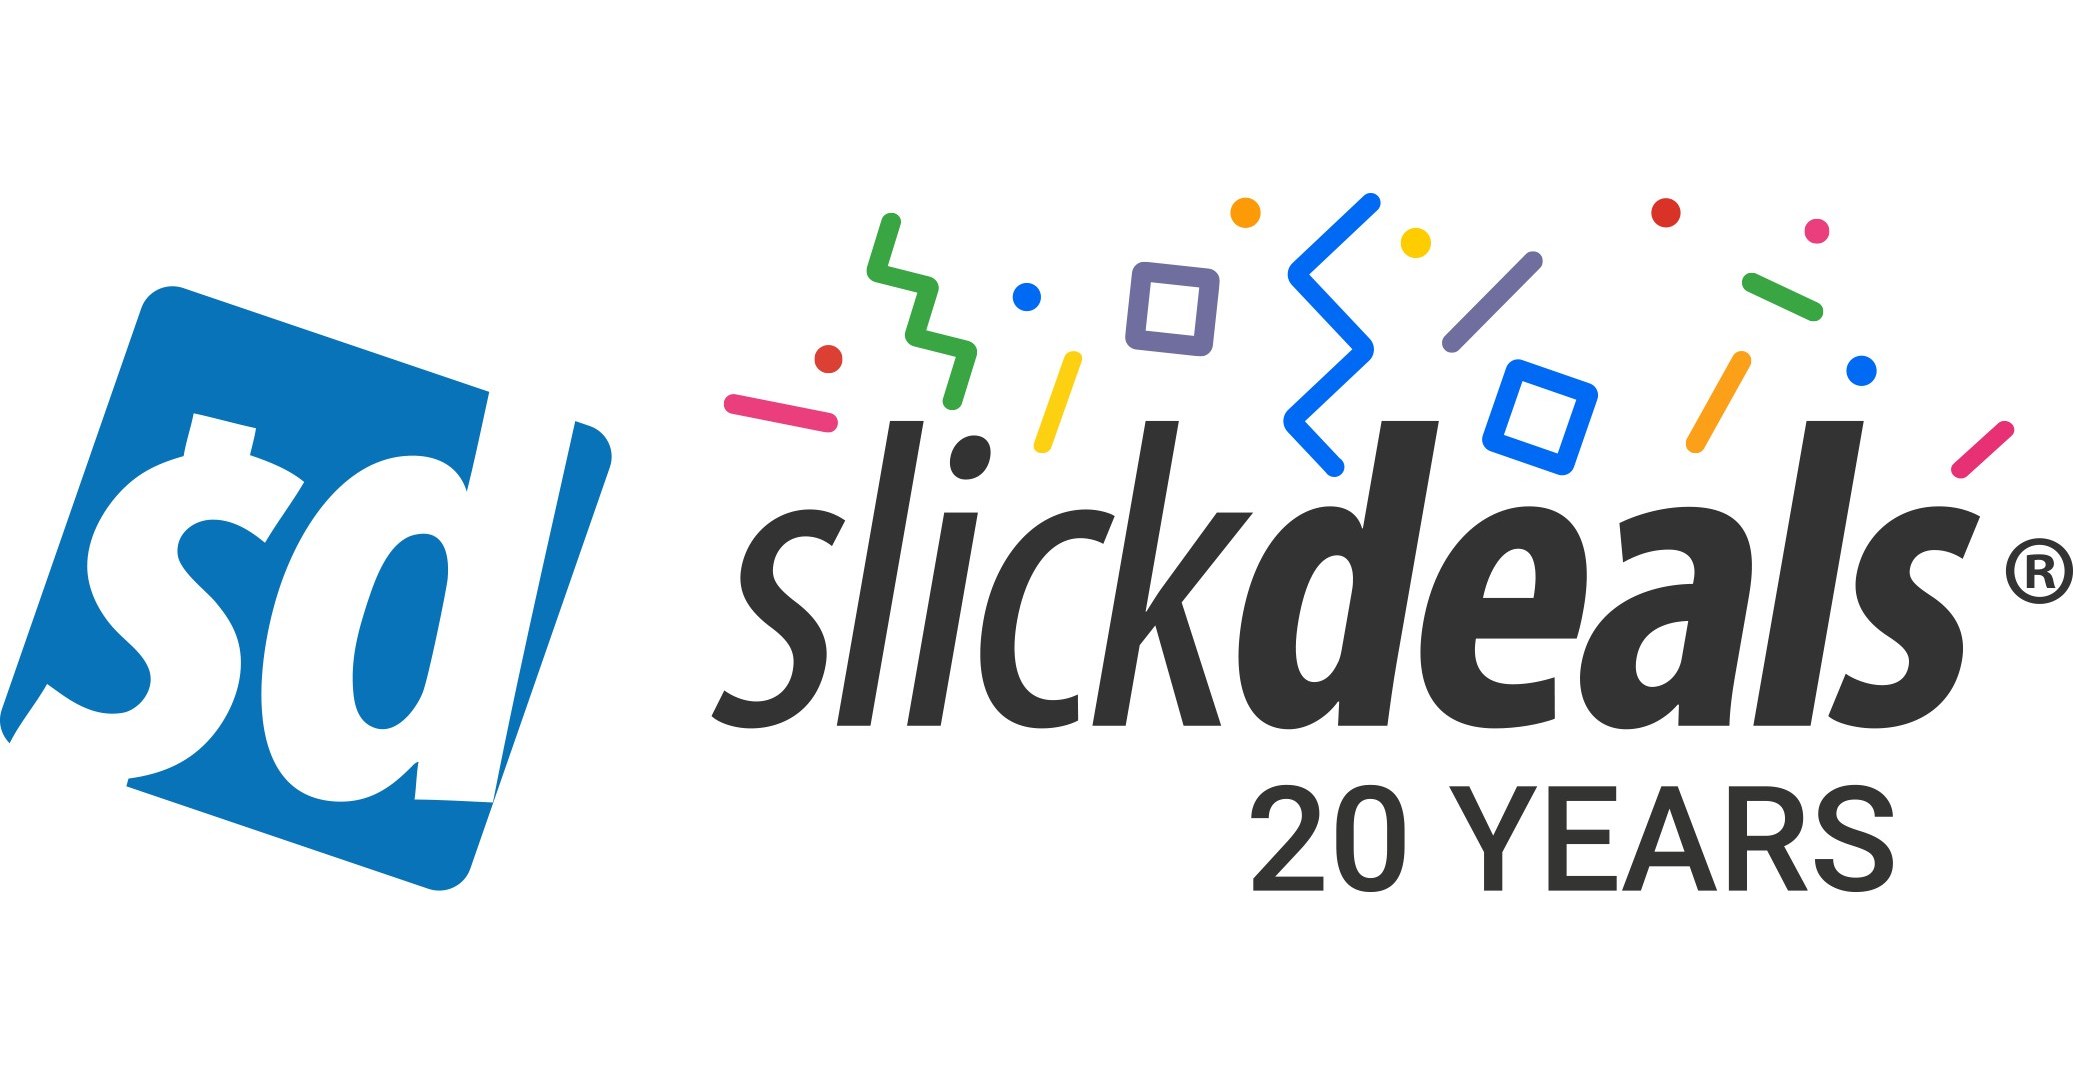 Slickdeals Announces "20 Days of Slickdeals," its 20th Anniversary